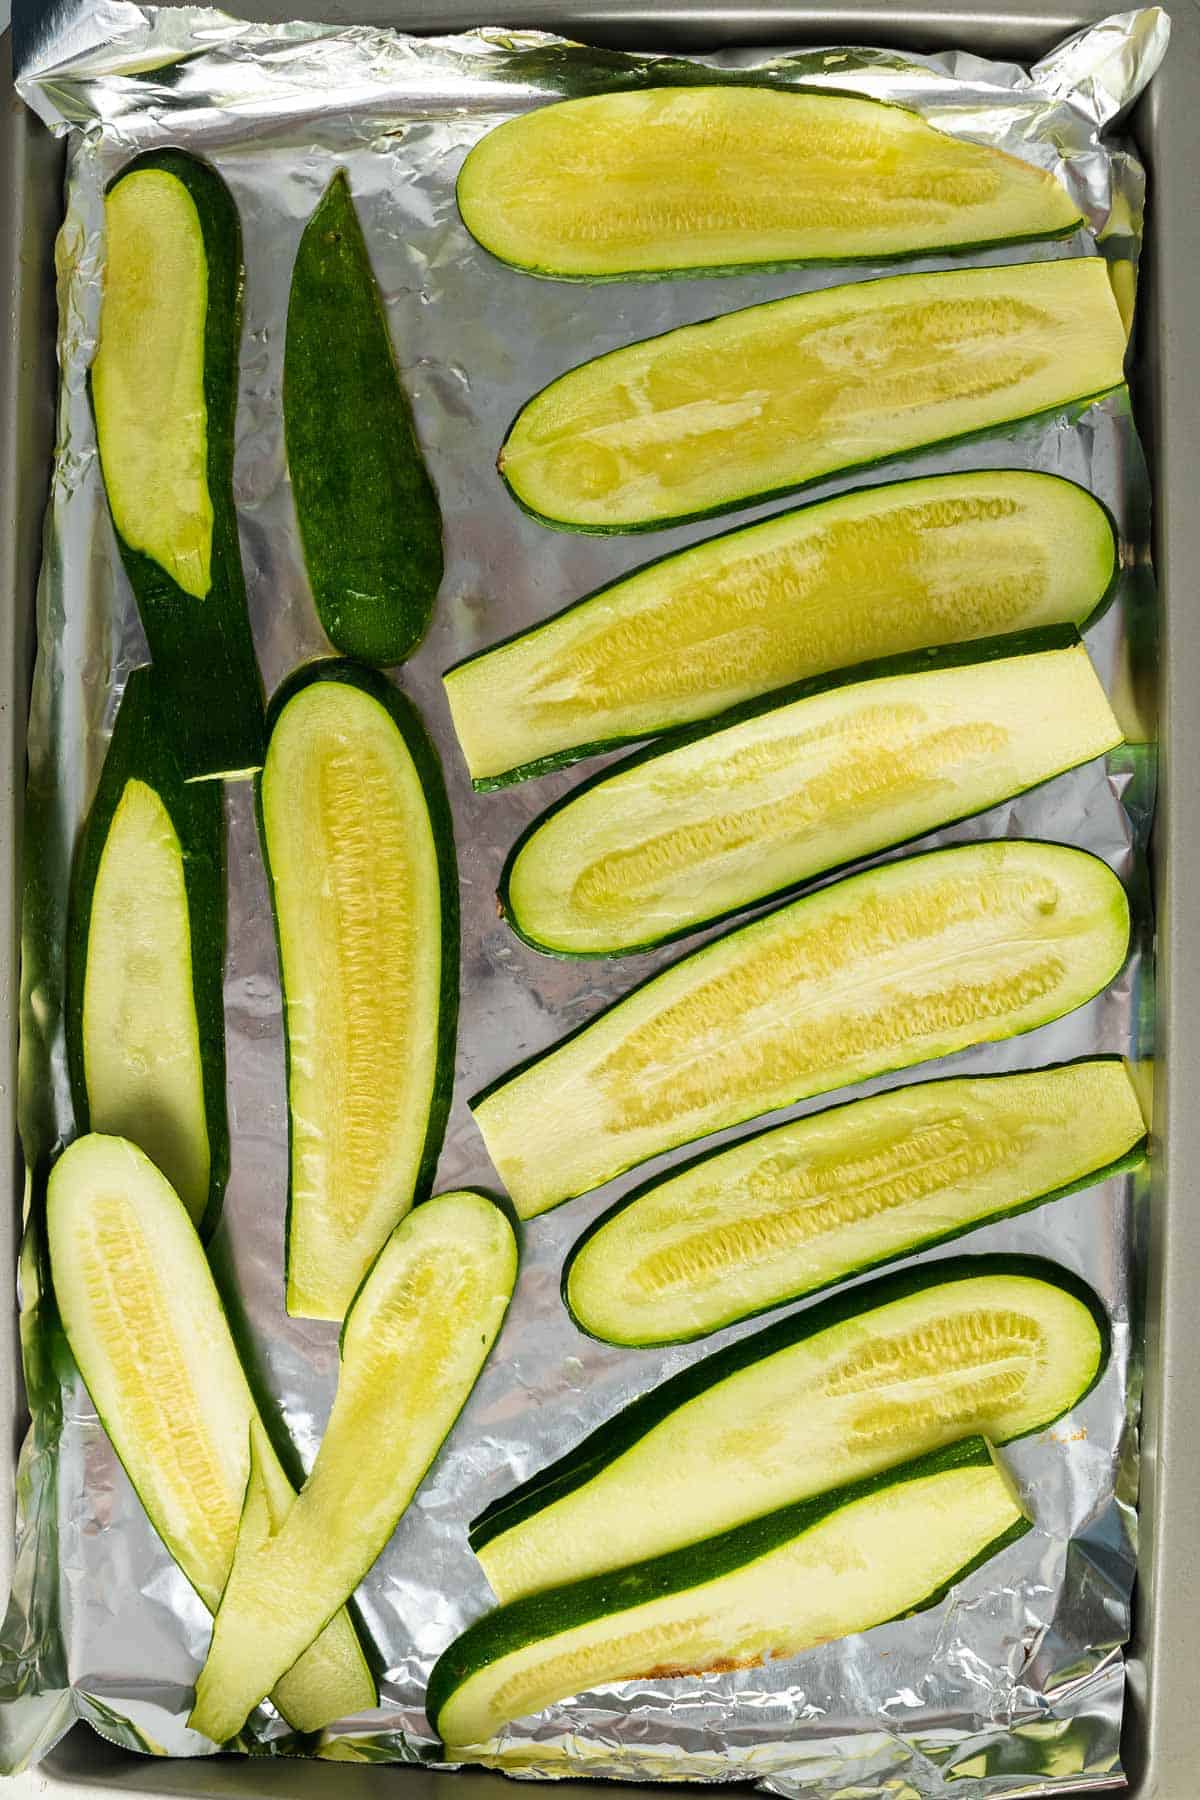 Cooked zucchini slices on a baking sheet lined with foil, as seen from above